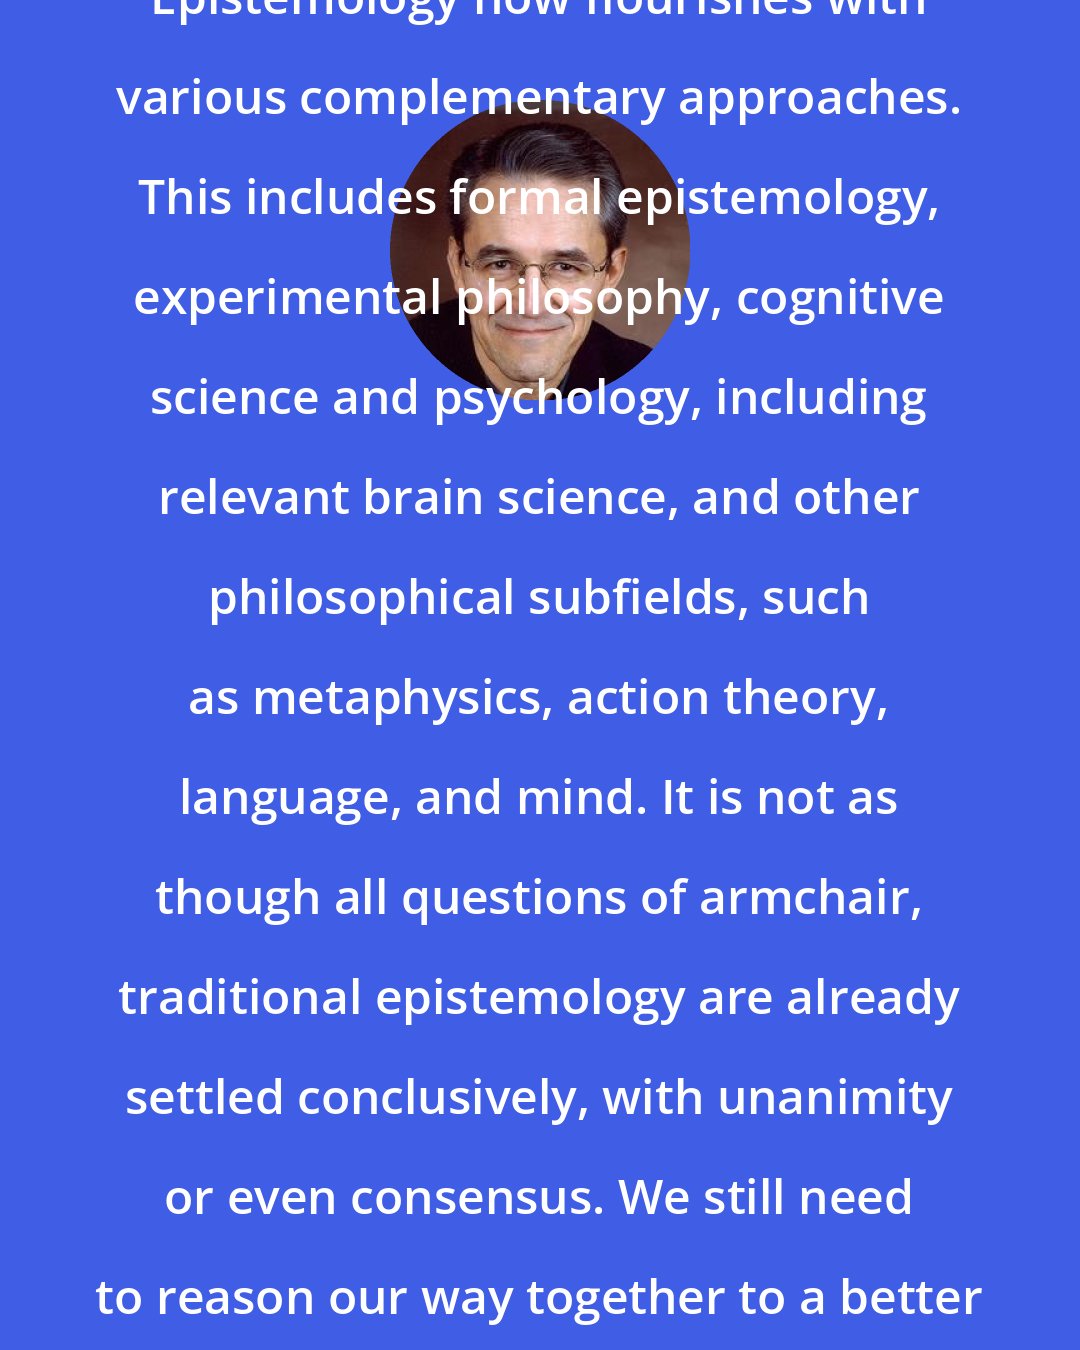 Ernest Sosa: Epistemology now flourishes with various complementary approaches. This includes formal epistemology, experimental philosophy, cognitive science and psychology, including relevant brain science, and other philosophical subfields, such as metaphysics, action theory, language, and mind. It is not as though all questions of armchair, traditional epistemology are already settled conclusively, with unanimity or even consensus. We still need to reason our way together to a better view of those issues.